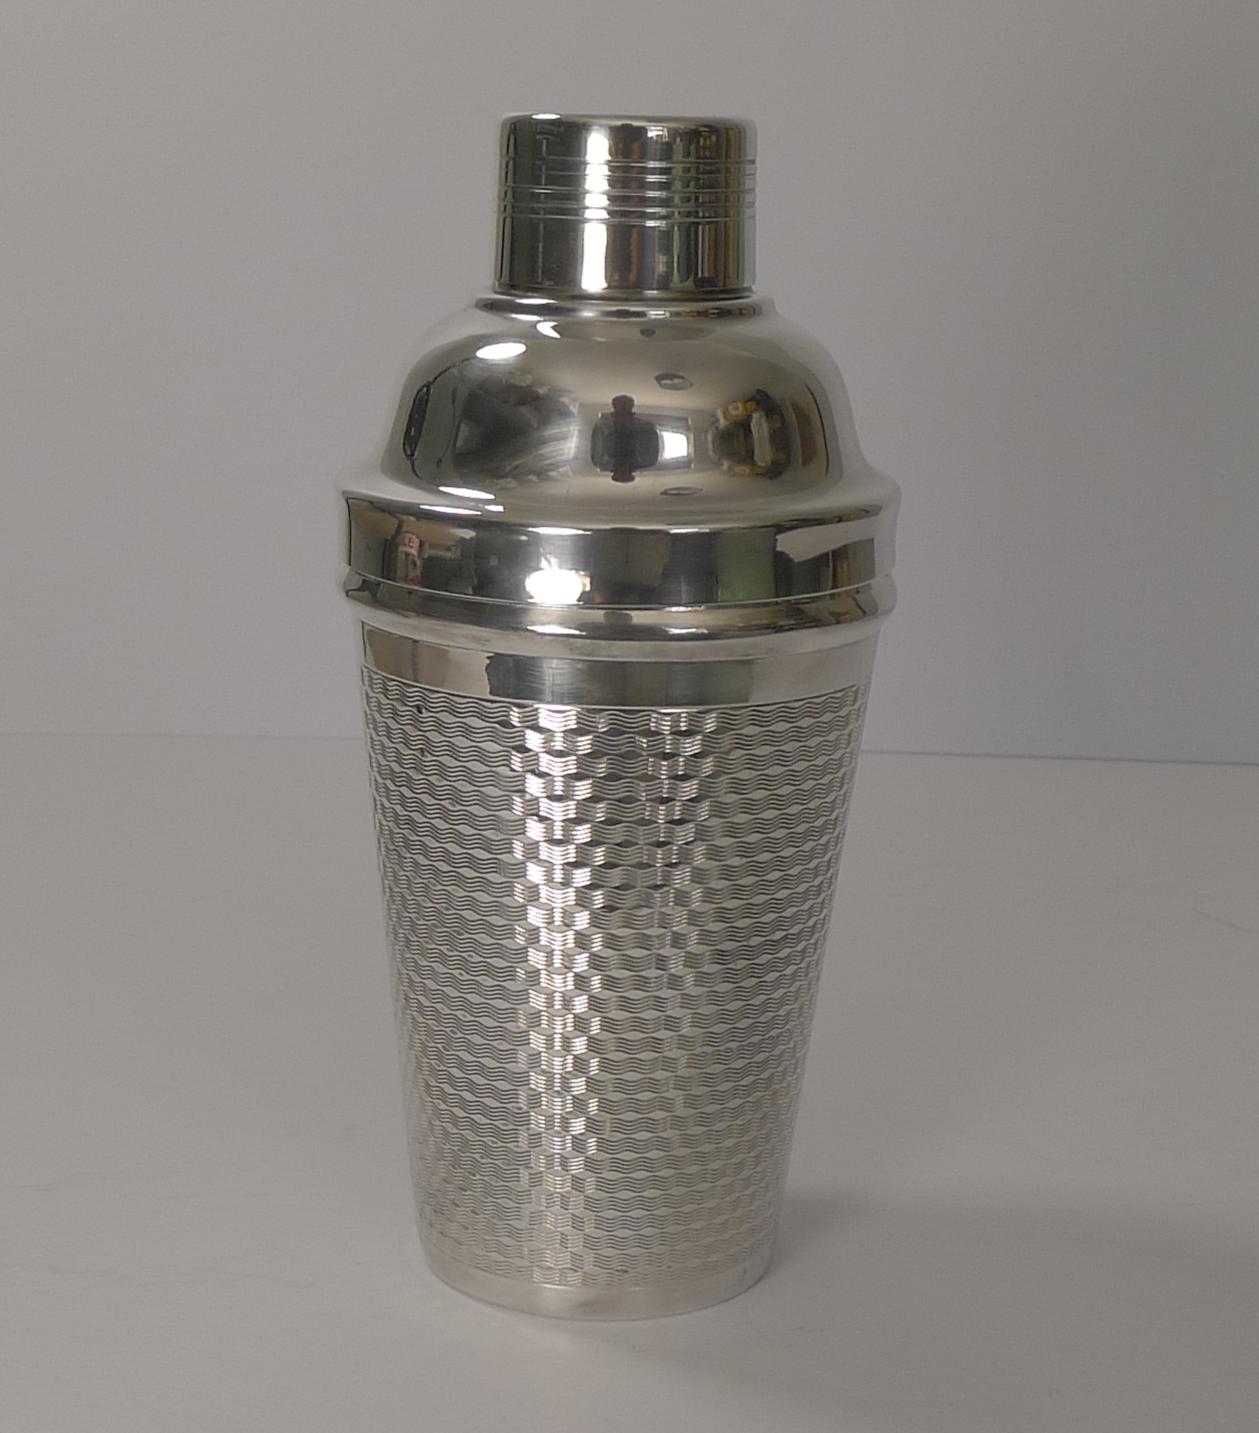 A stunning Art Deco cocktail shaker in silver plate, in lovely condition inside and out, the body having beautiful engine turned decoration all around.

The underside is signed by the silversmith, W.A, I think for William Adams of Birmingham. It